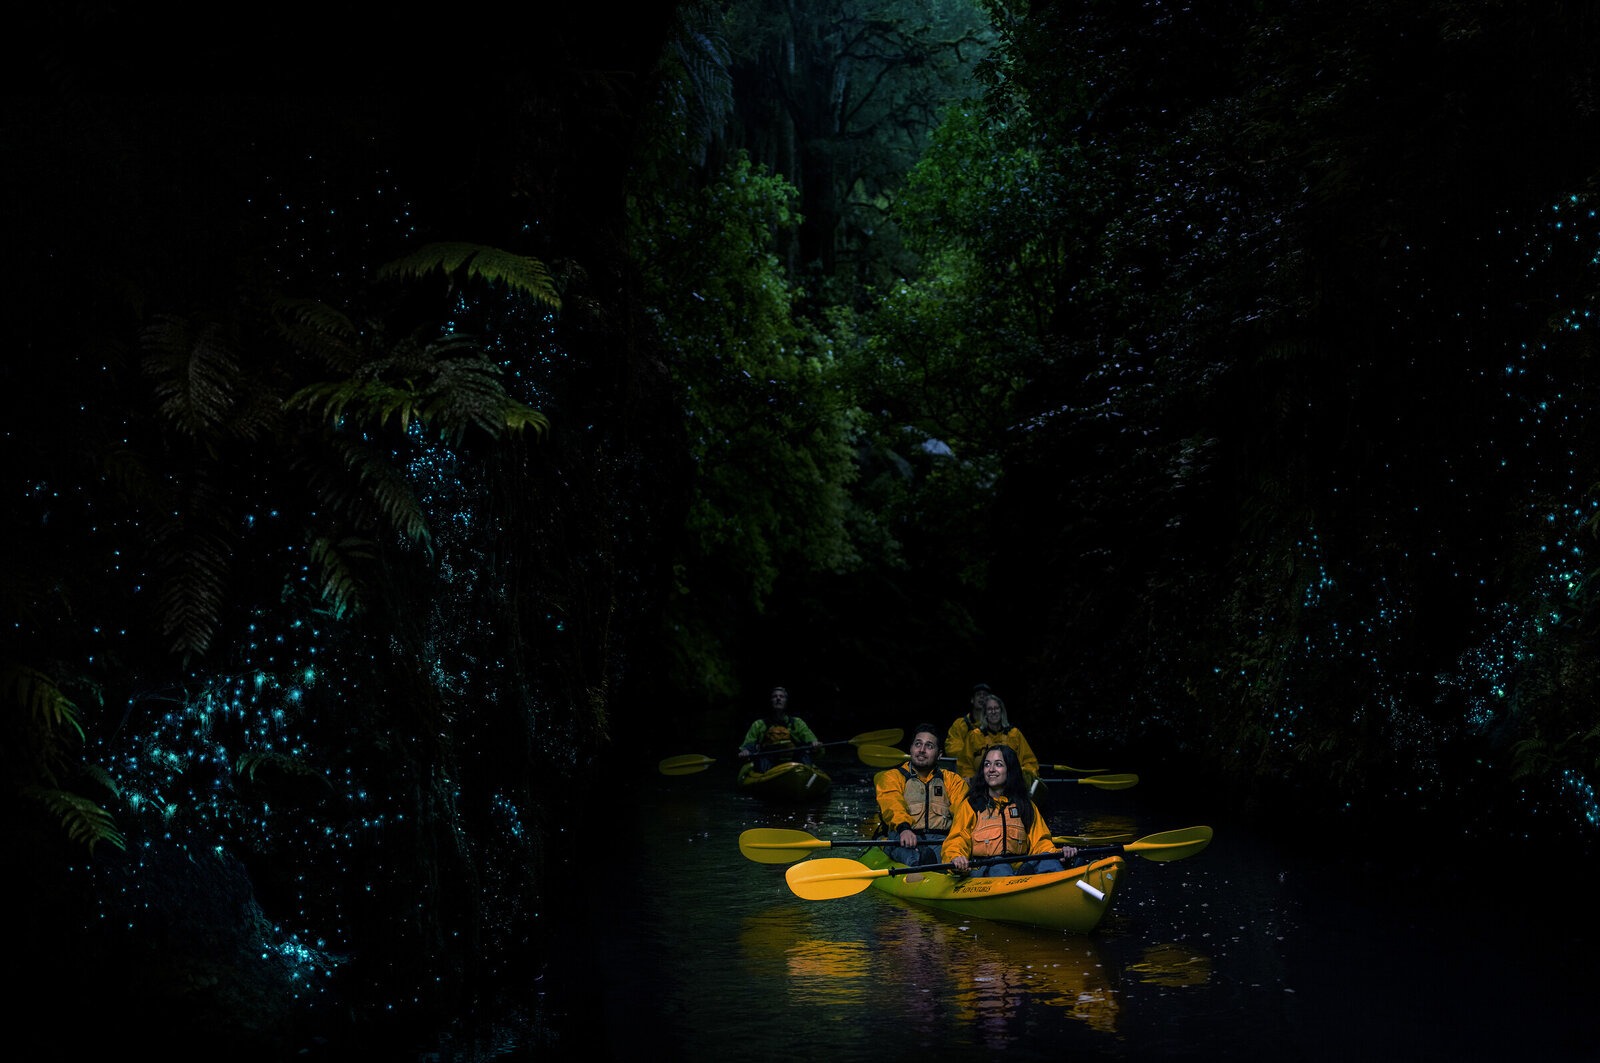 Glowworms at night with people in kayaks